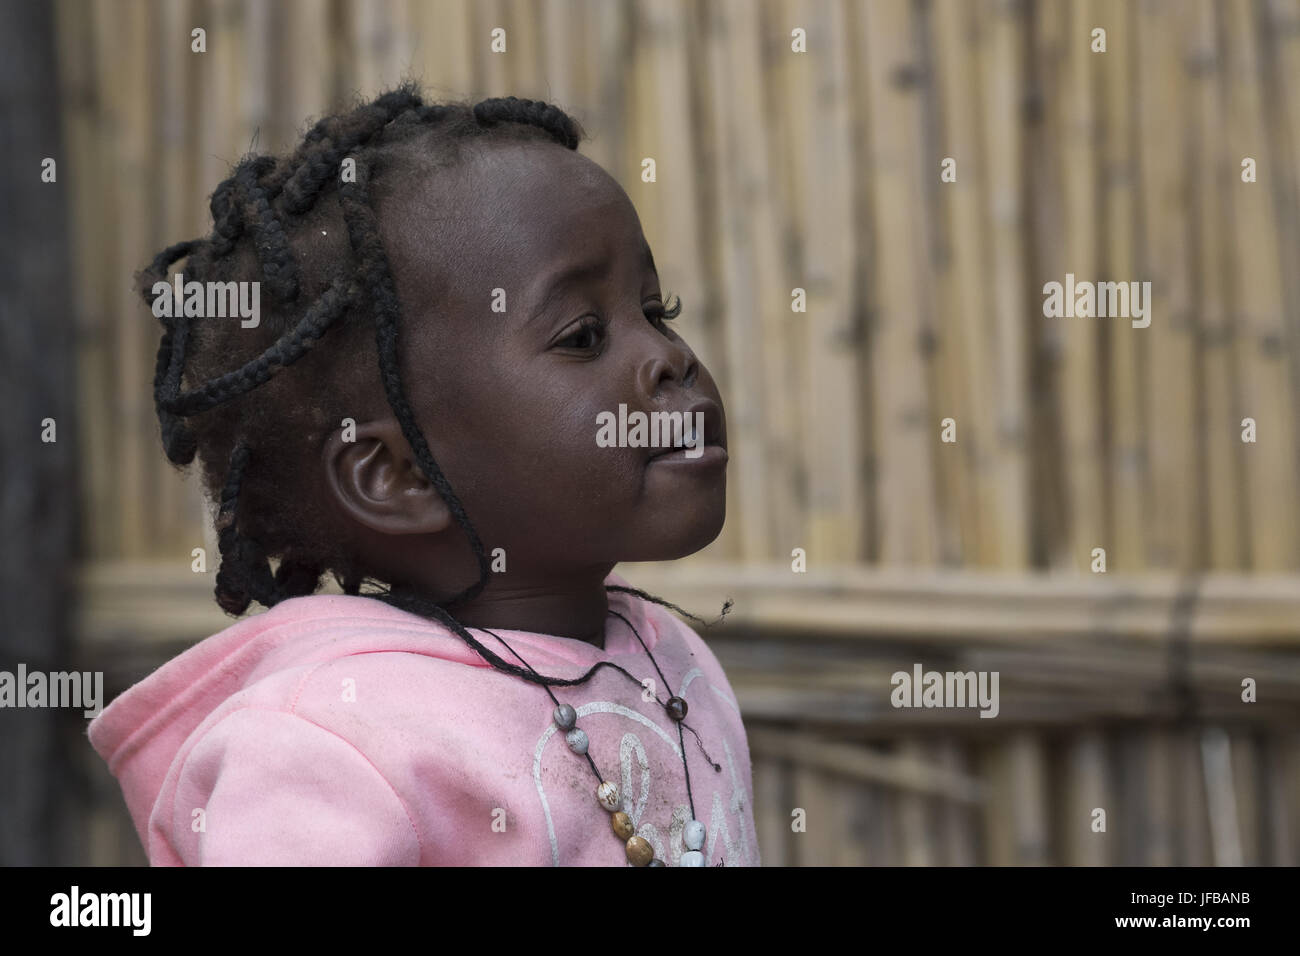 Portrait, african girl, app. 3 years old Stock Photo